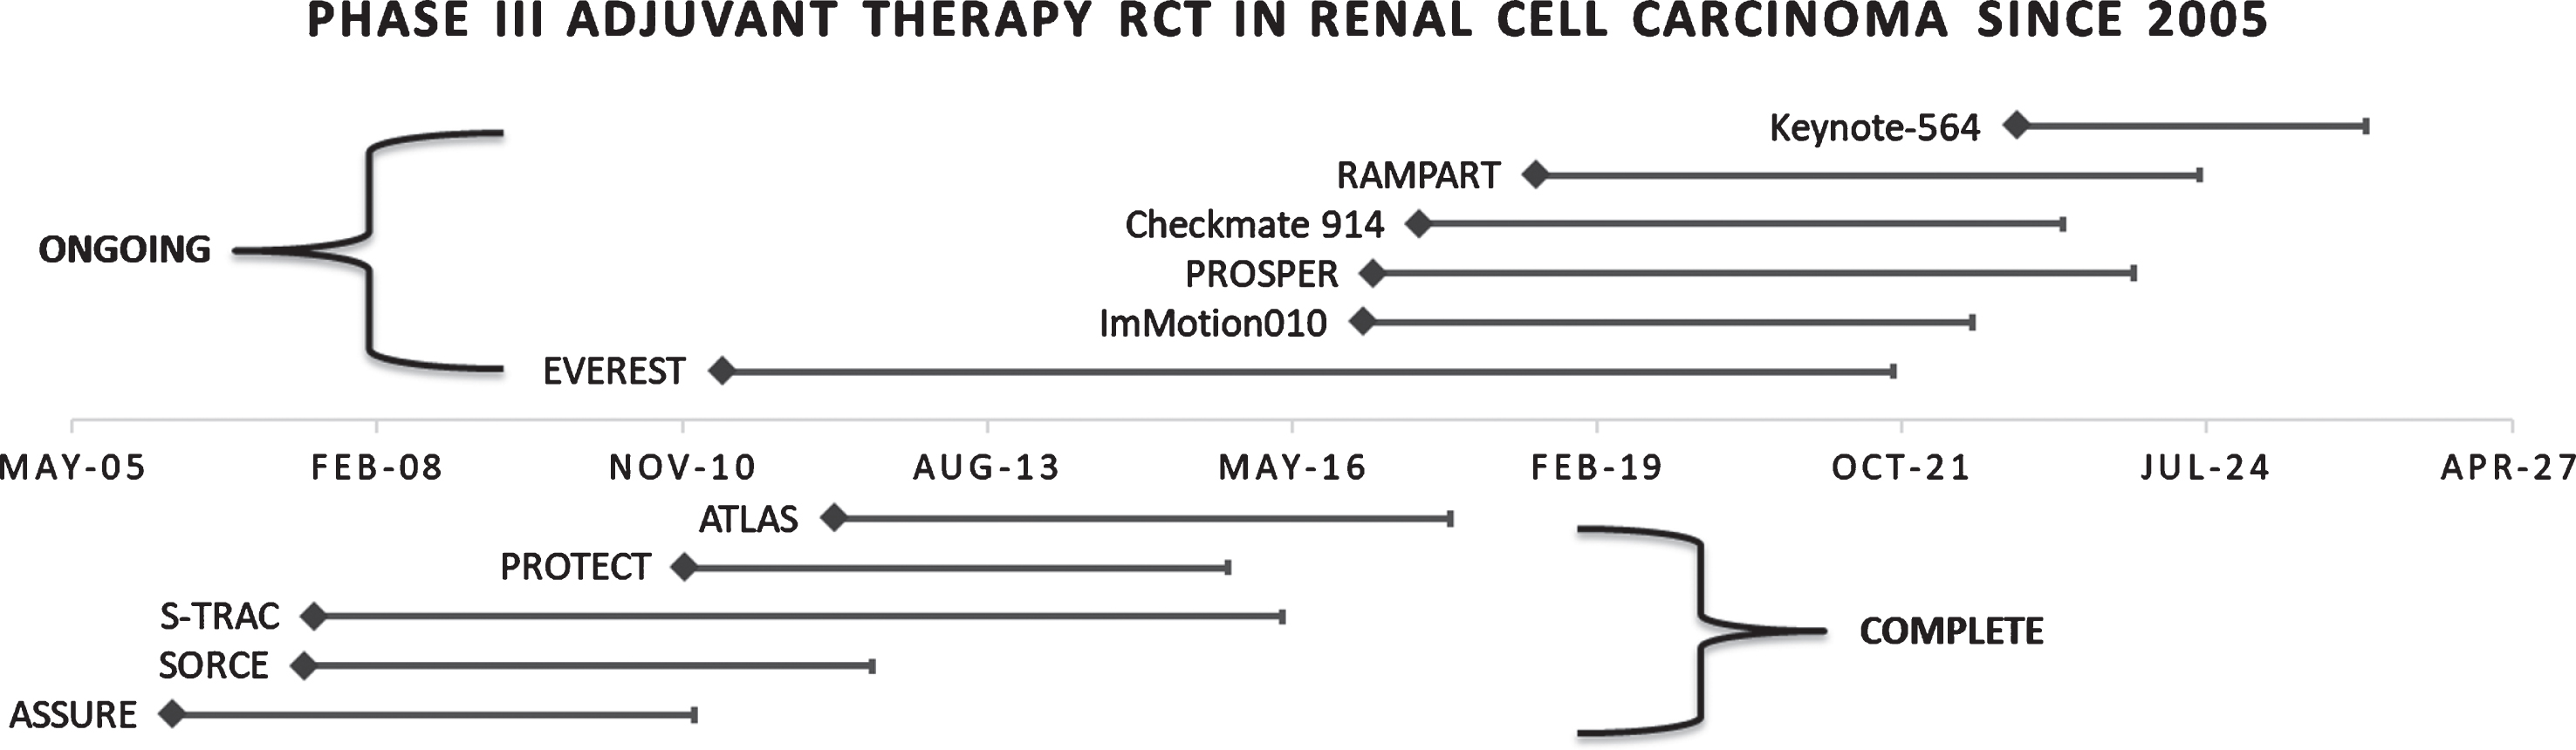 Phase III trials completed and ongoing in renal cell carcinoma since the start of the tyrosine kinase era. Abbreviations: RCT, randomized clinical trial.